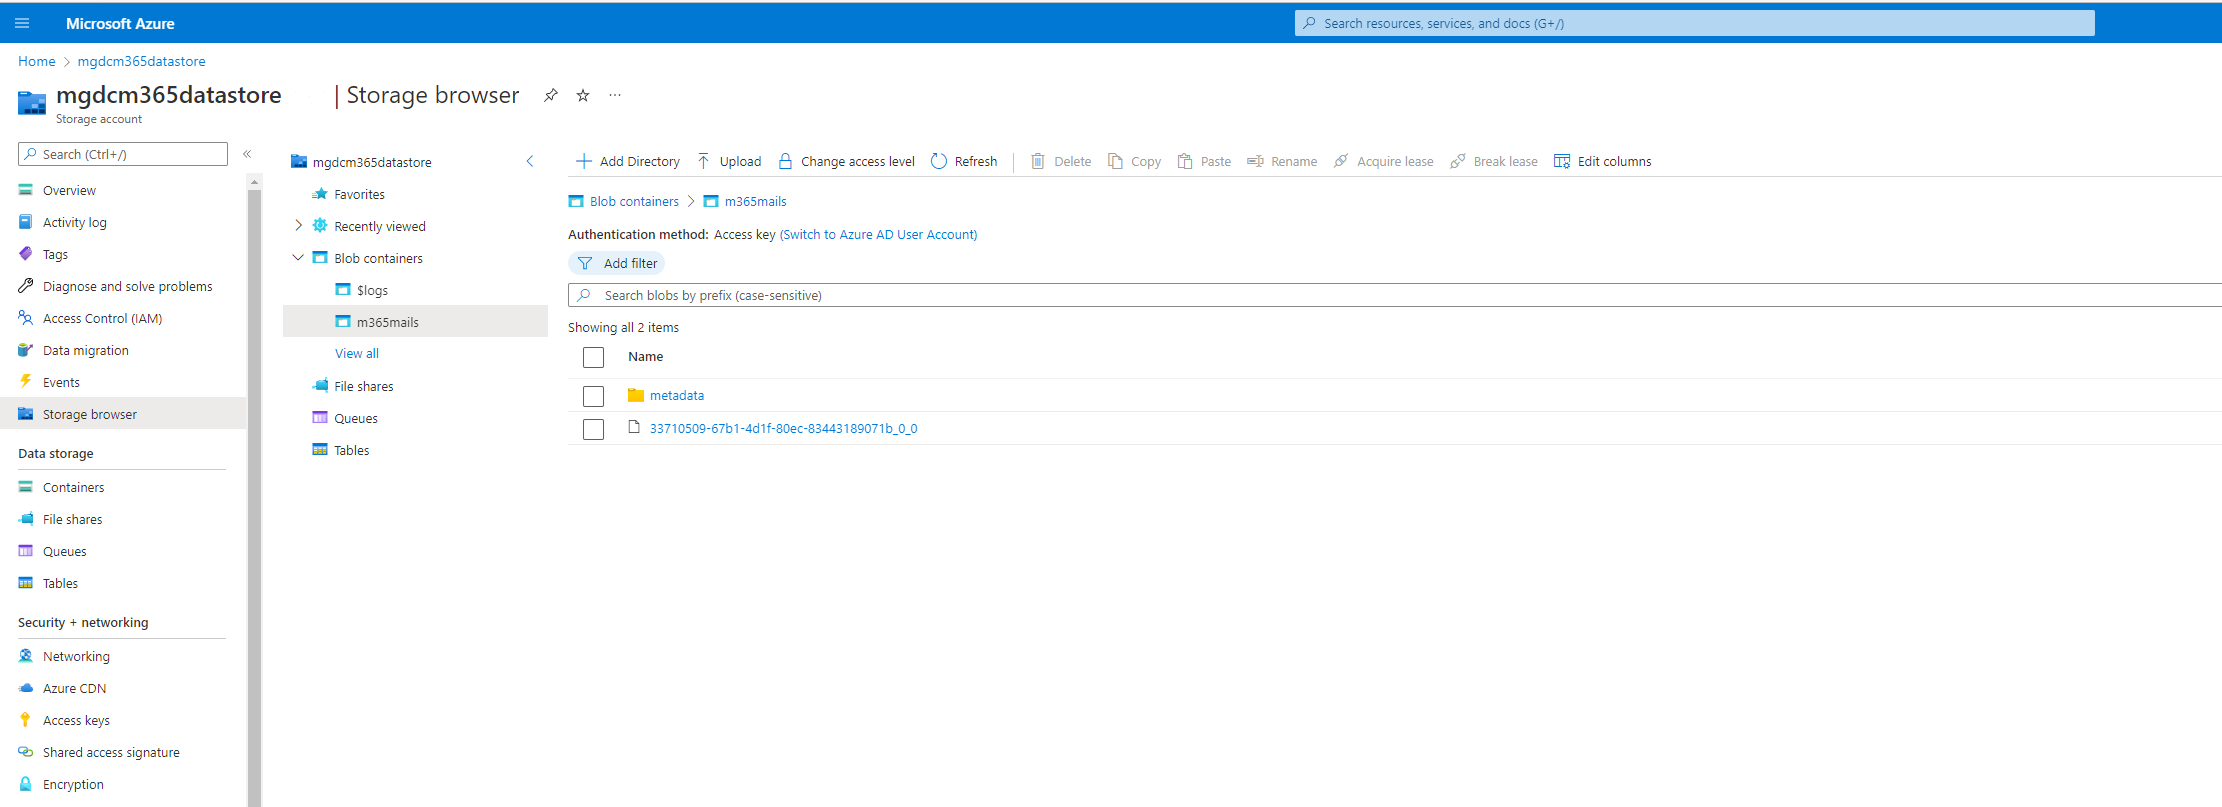 A screenshot showing the Azure portal UI for the Storage account service. It is showing the container where the extracted data is being stored.